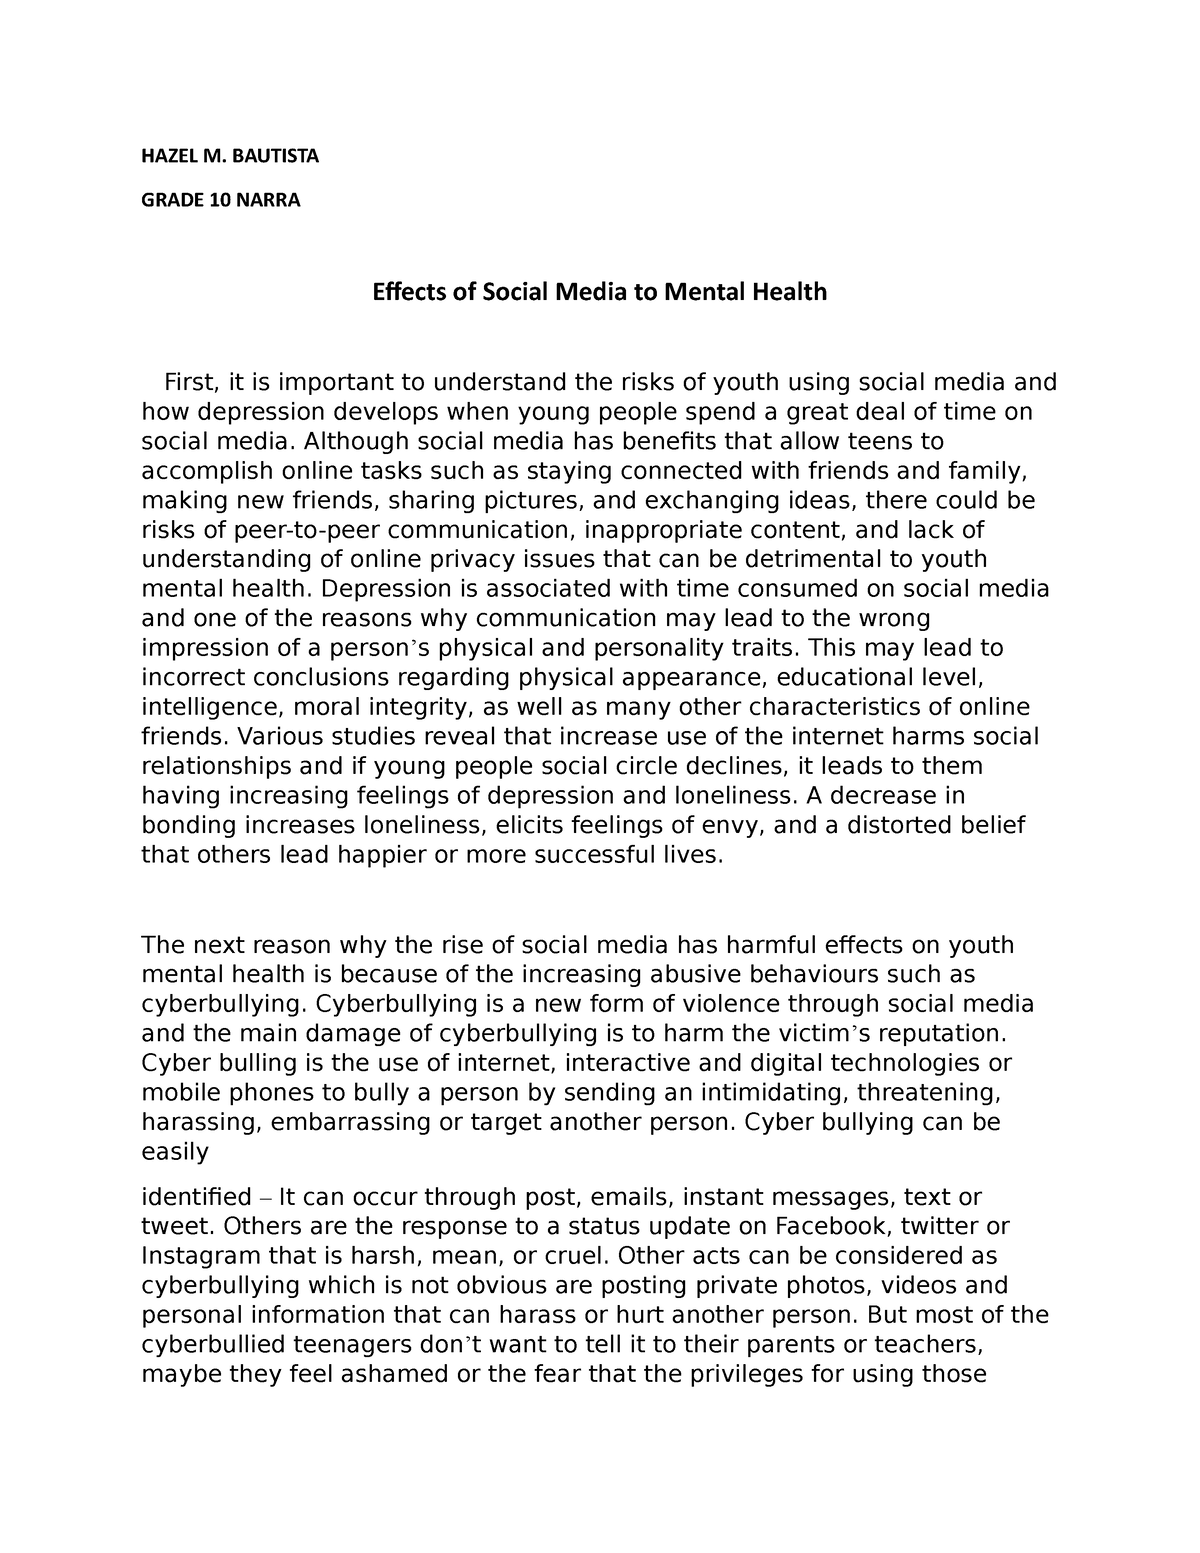 persuasive essay about effects of social media to mental health